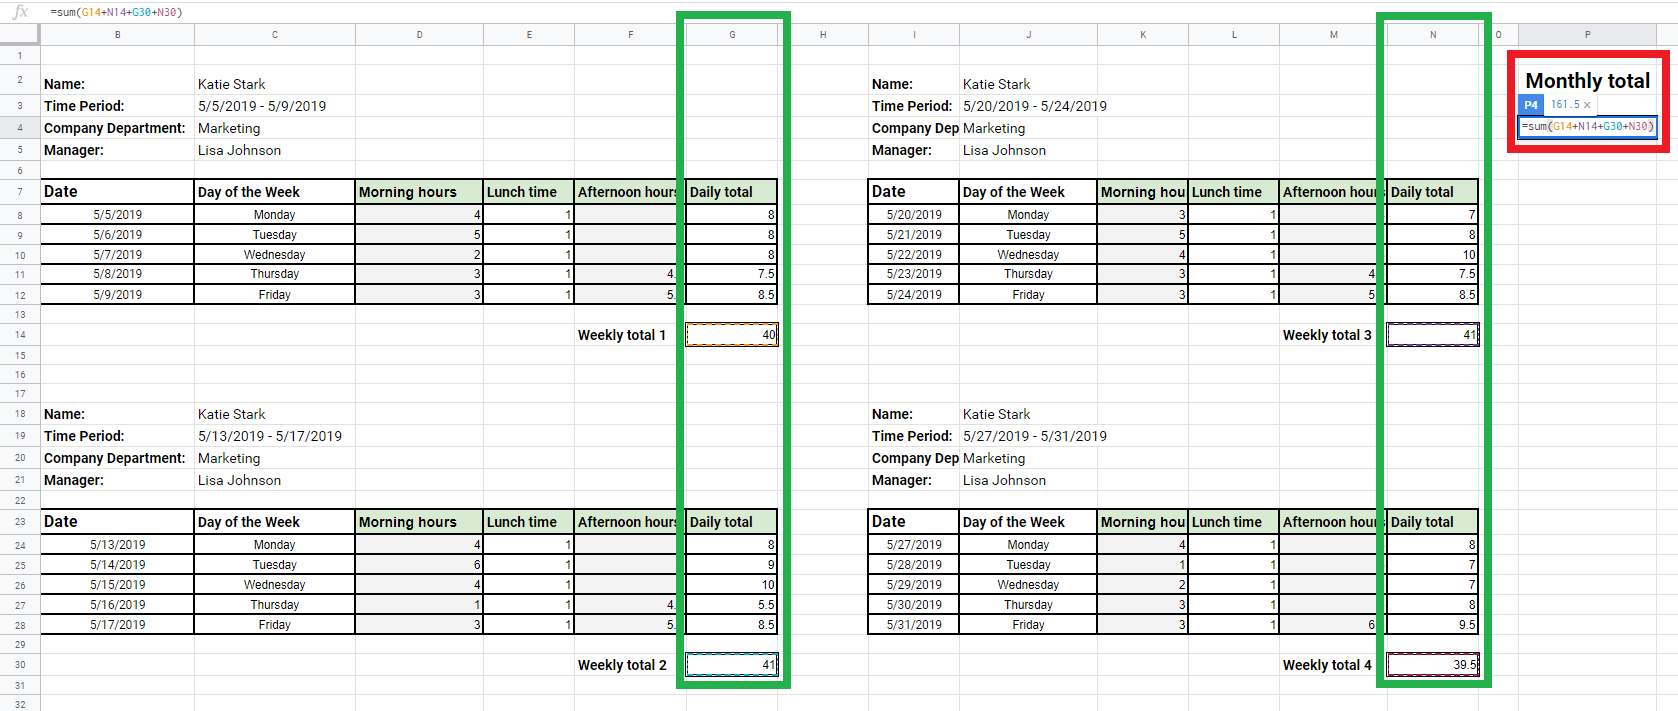 Excel Timesheet Template With Formulas from clockify.me